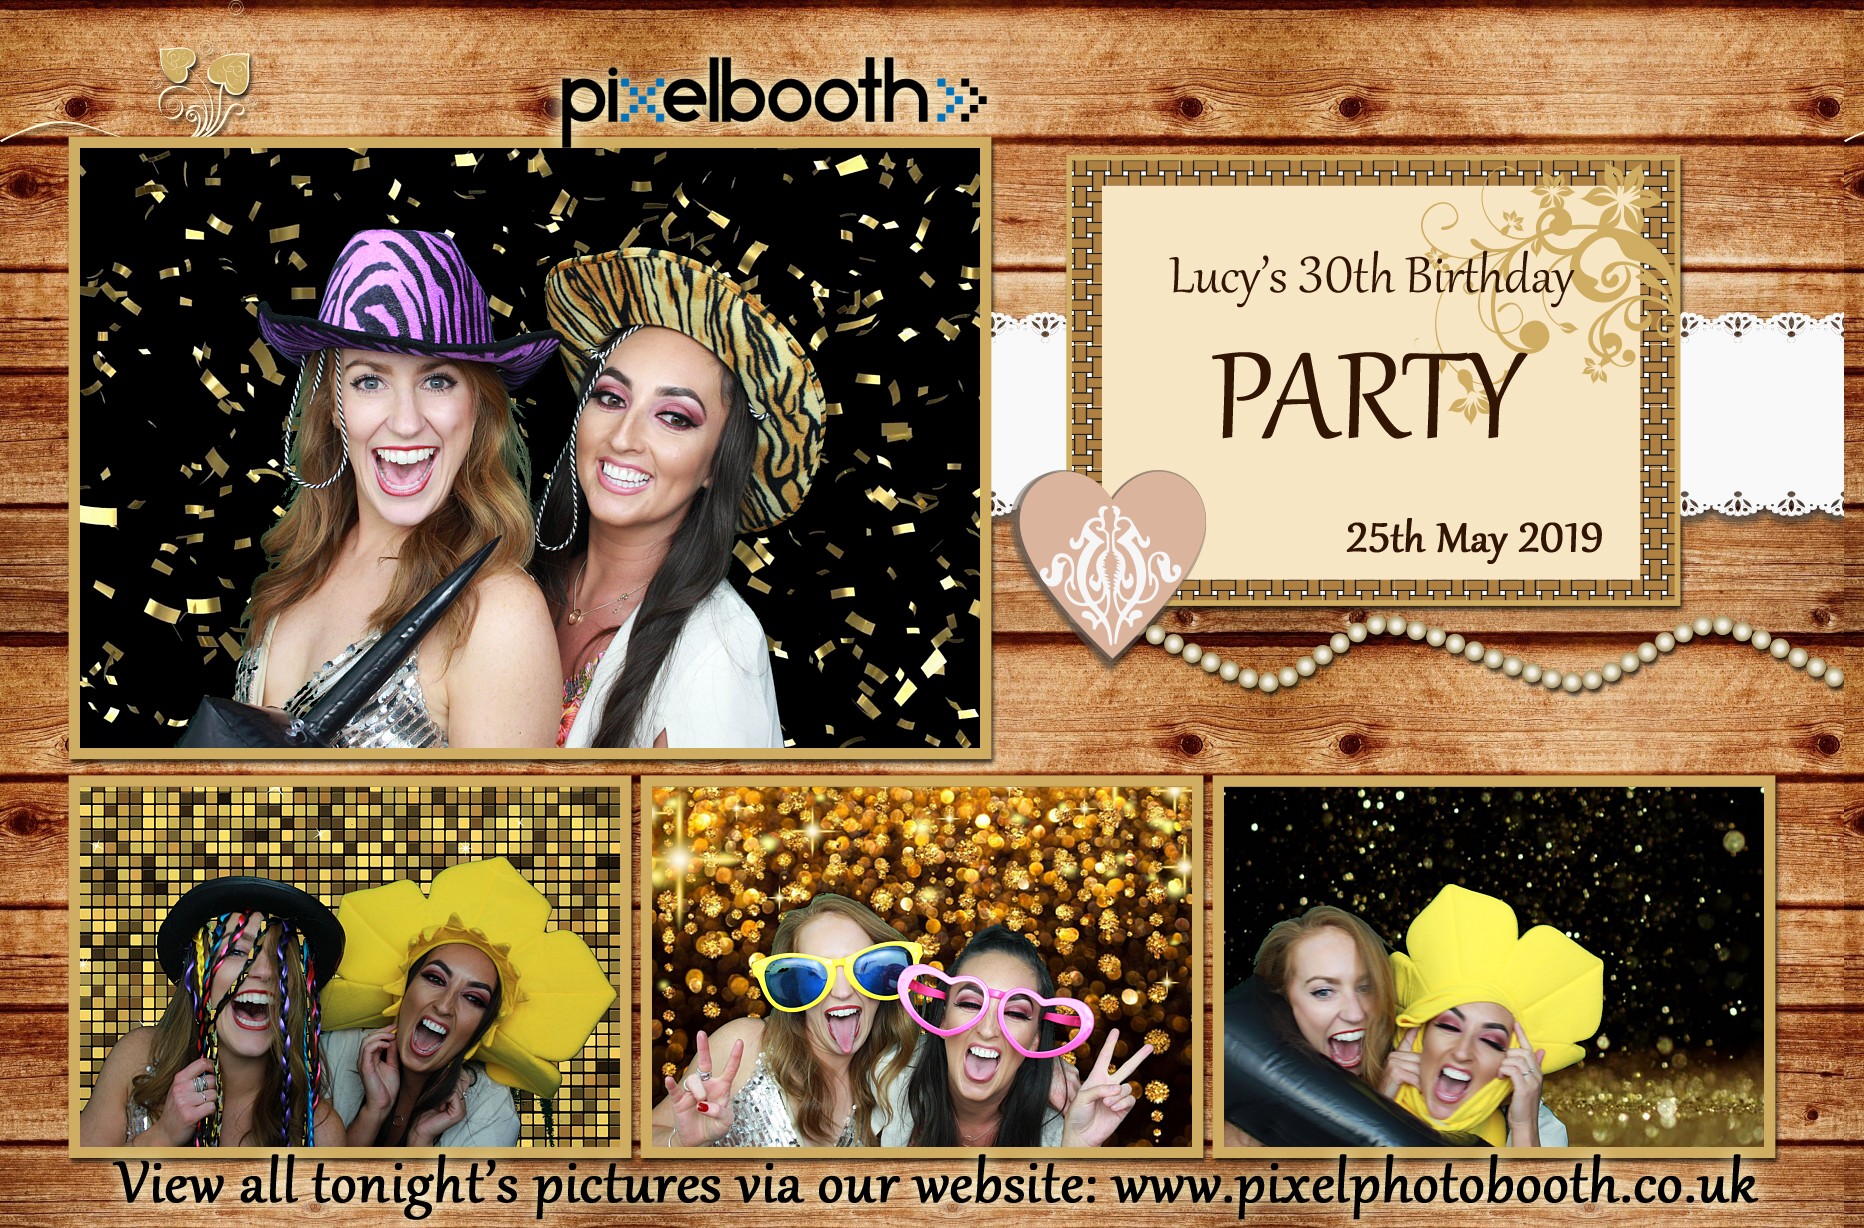 25th May 2019: Lucy's 30th Birthday Party